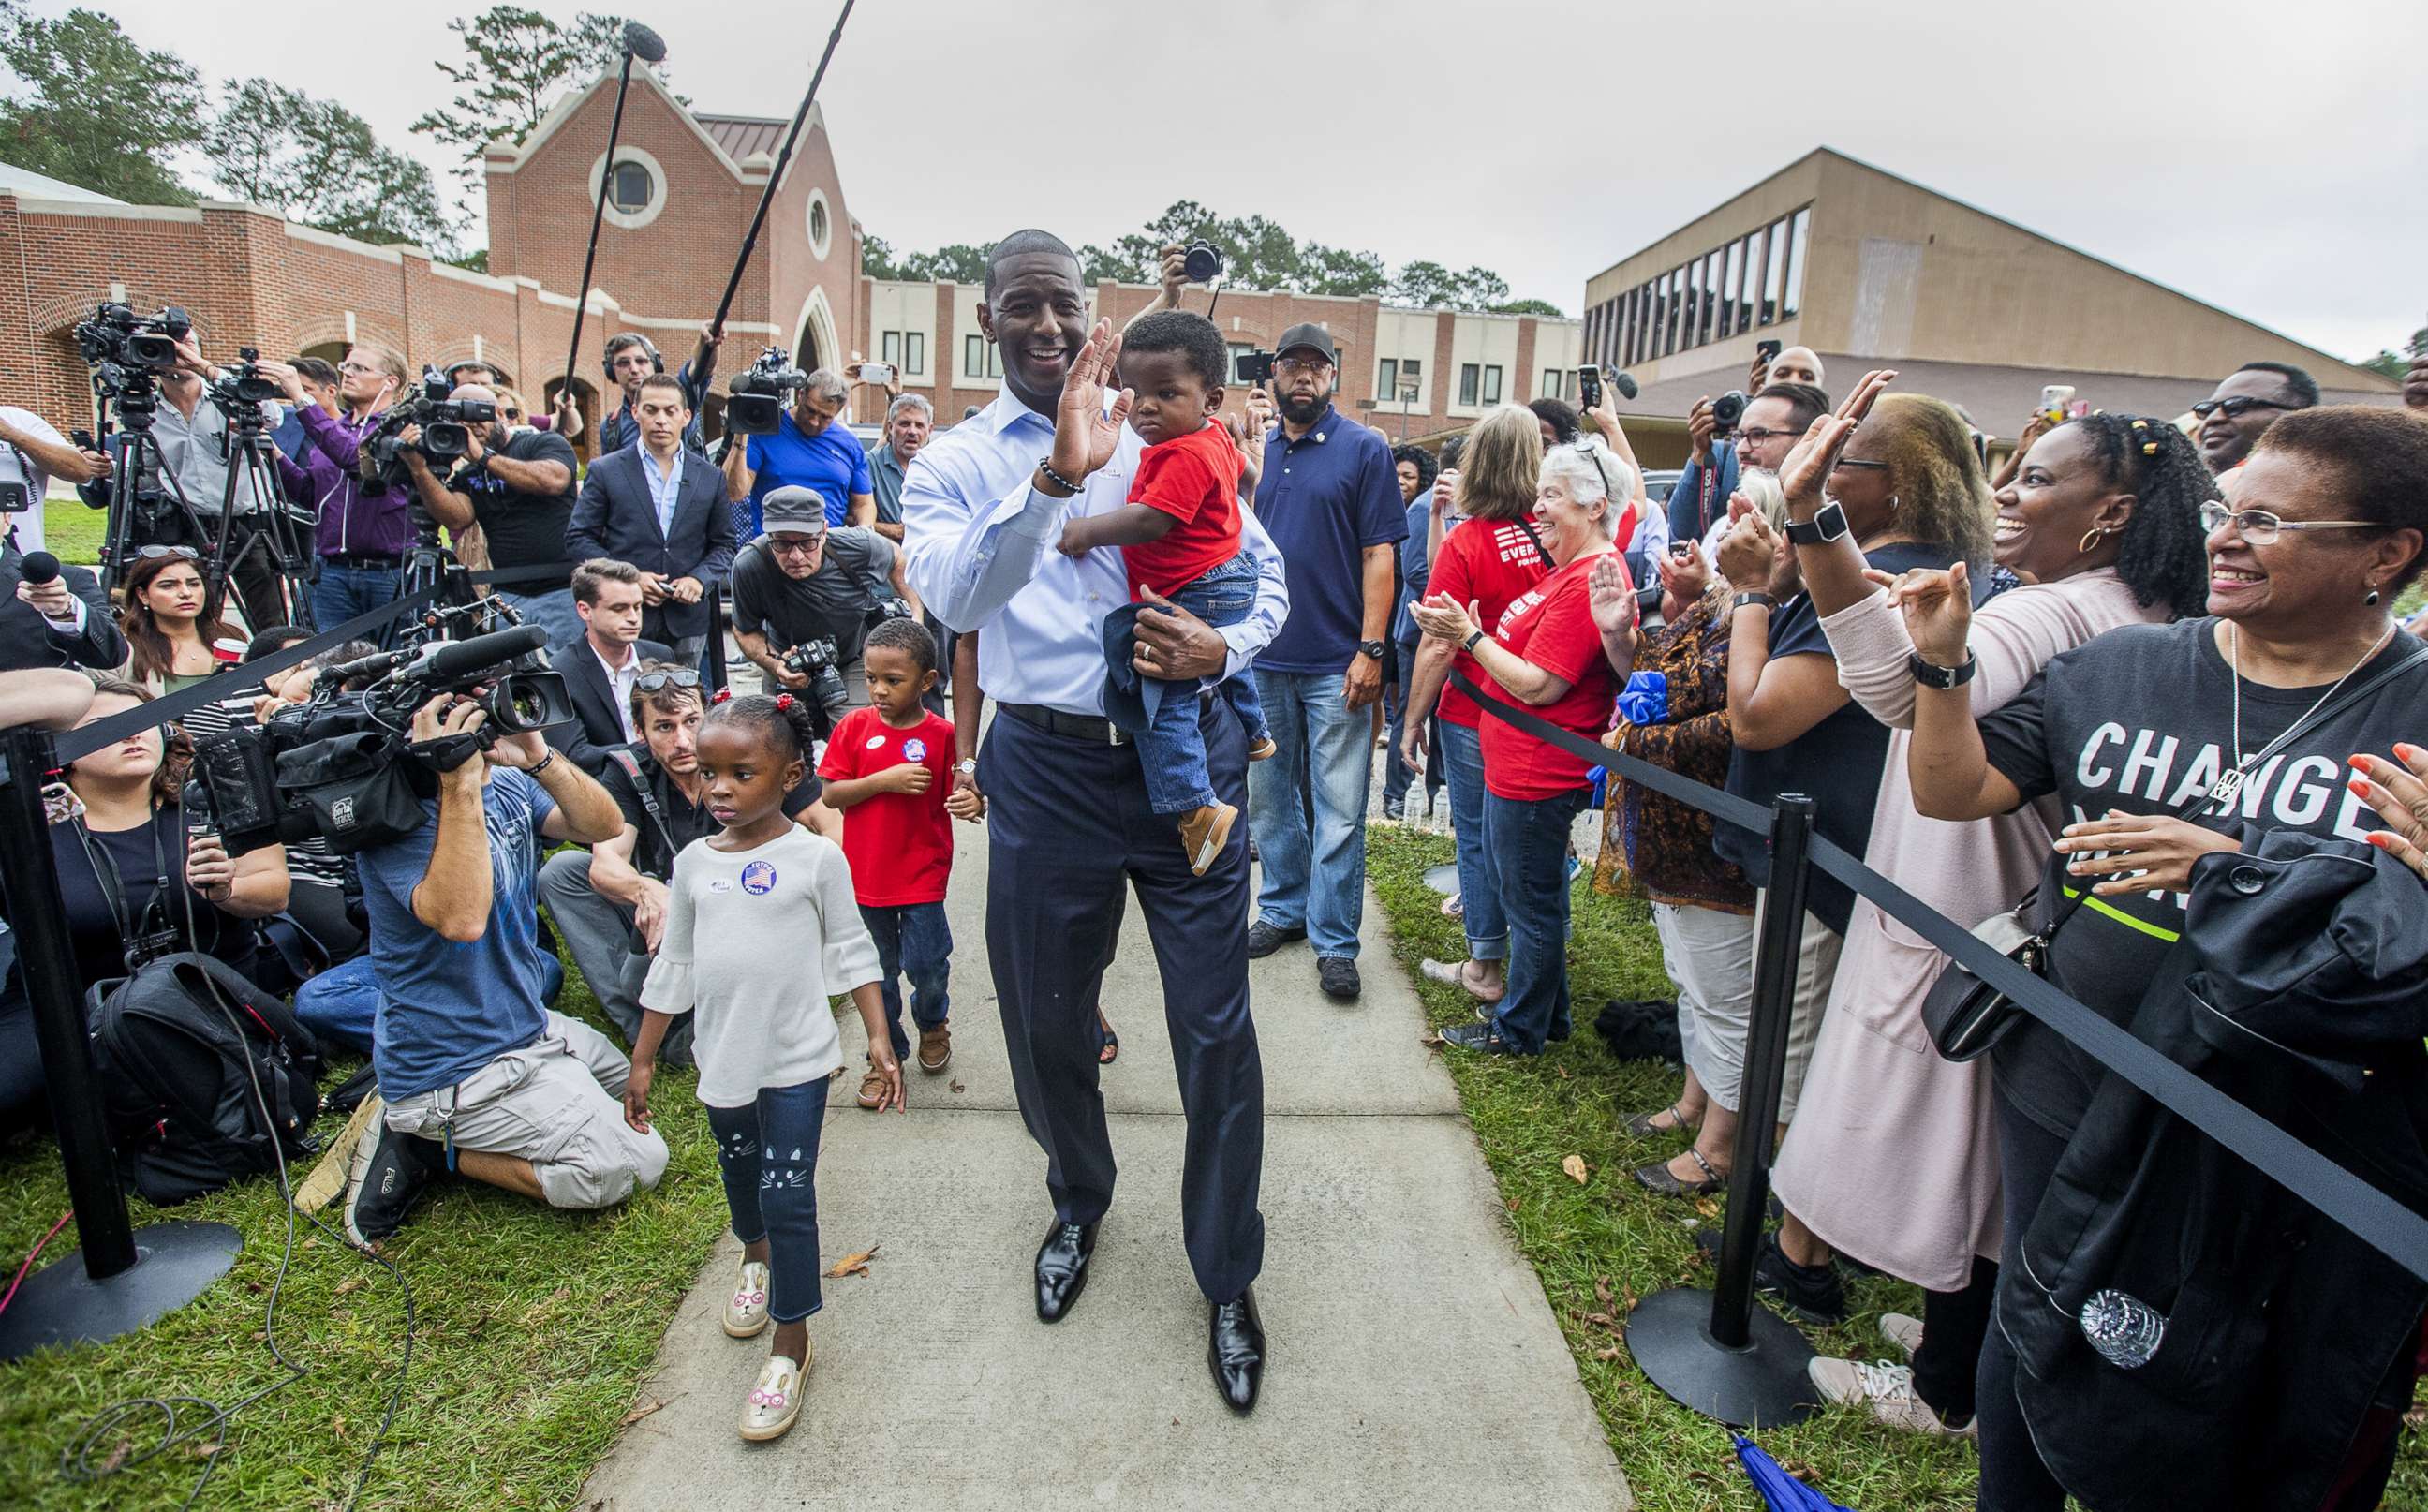 PHOTO: Tallahassee mayor and Florida Democratic gubernatorial candidate Andrew Gillum waves at supporters after casting his ballot with his children on Nov. 6, 2018 in Tallahassee, Fla.